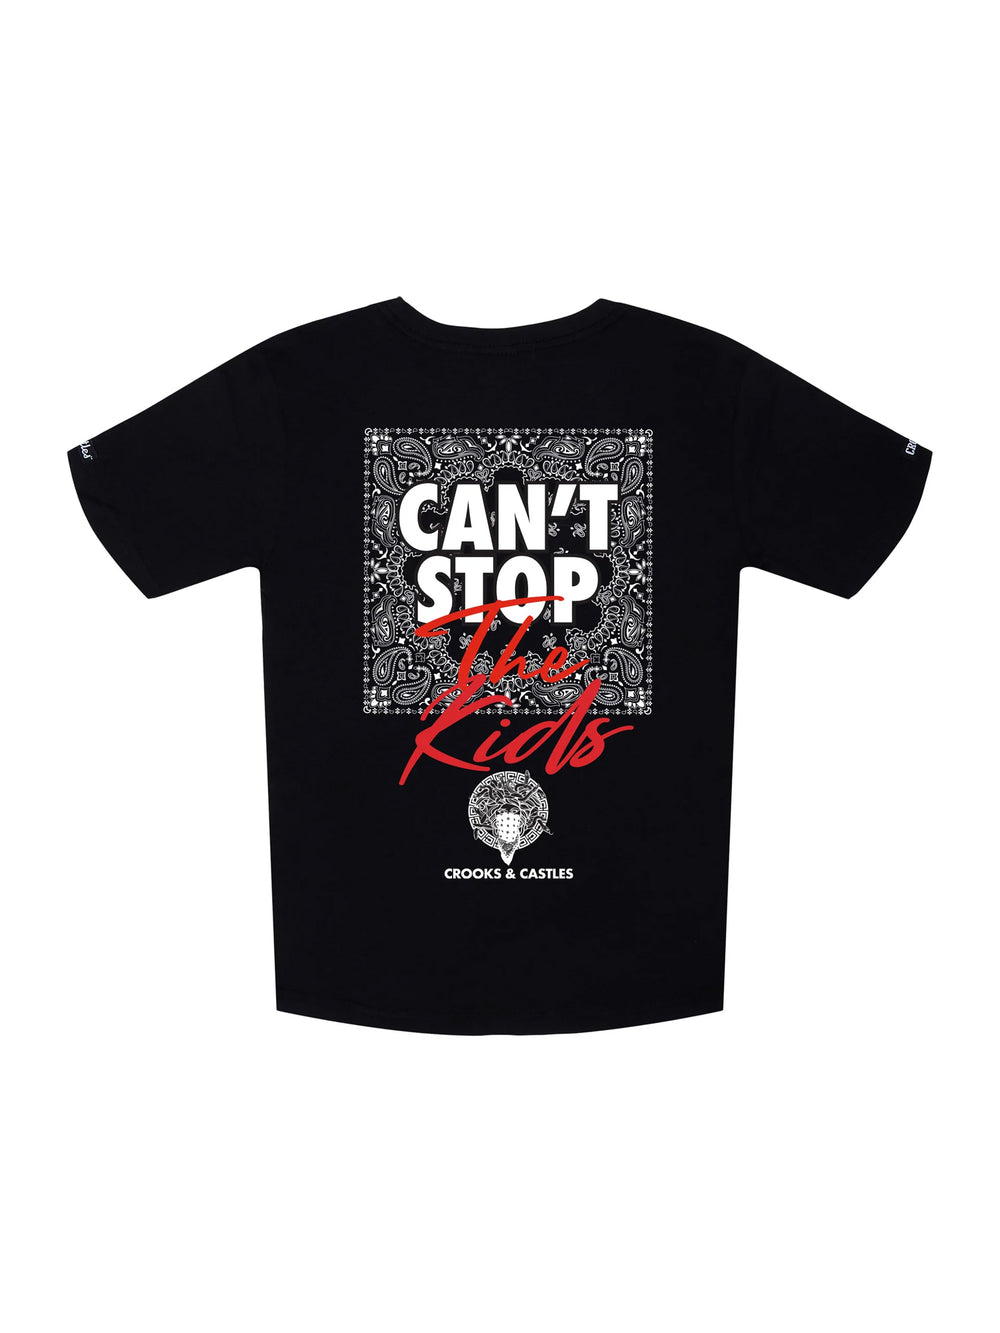 CROOKS & CASTLES YOUTH BOYS CAN'T STOP THE KIDS T-SHIRT